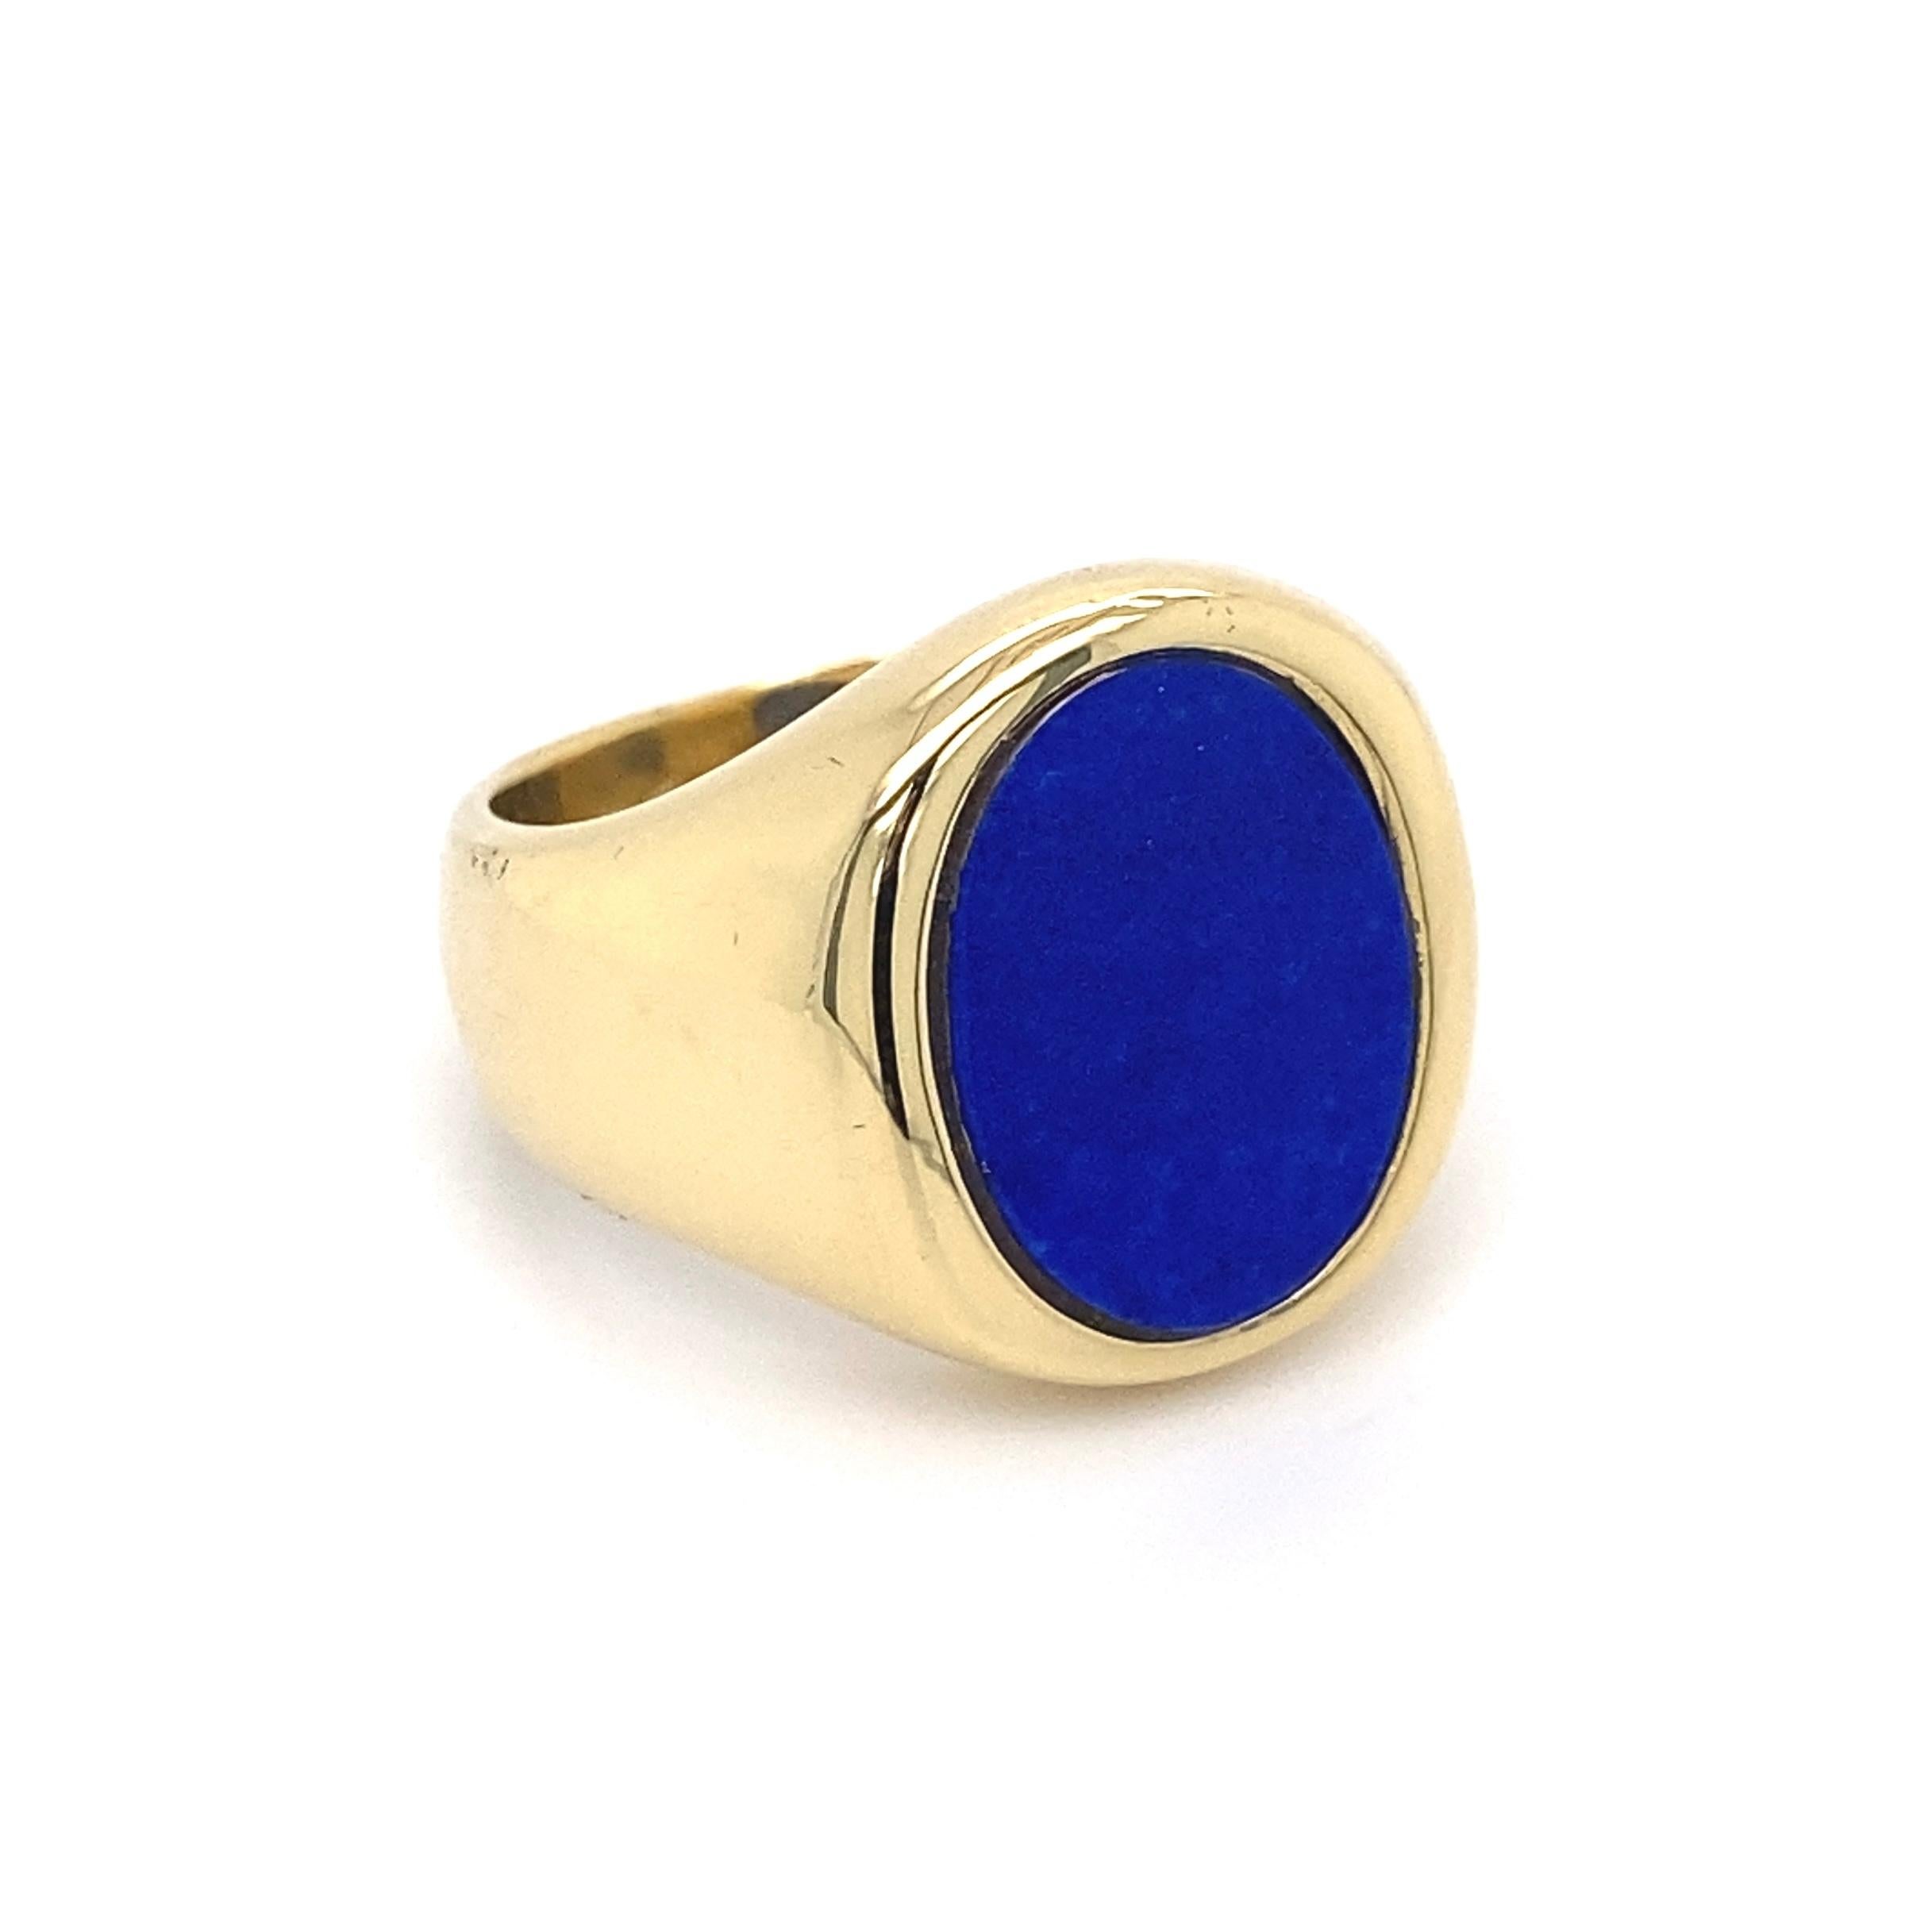 Handsome High Quality Men’s Gold Ring, securely set with an Oval Natural Lapis Lazuli, hand crafted in 18 Karat Yellow Gold mounting. Ring size 8, ring sizing available. Dimensions 0.92”w x 0.71”h x 0.94”d. In excellent condition, recently